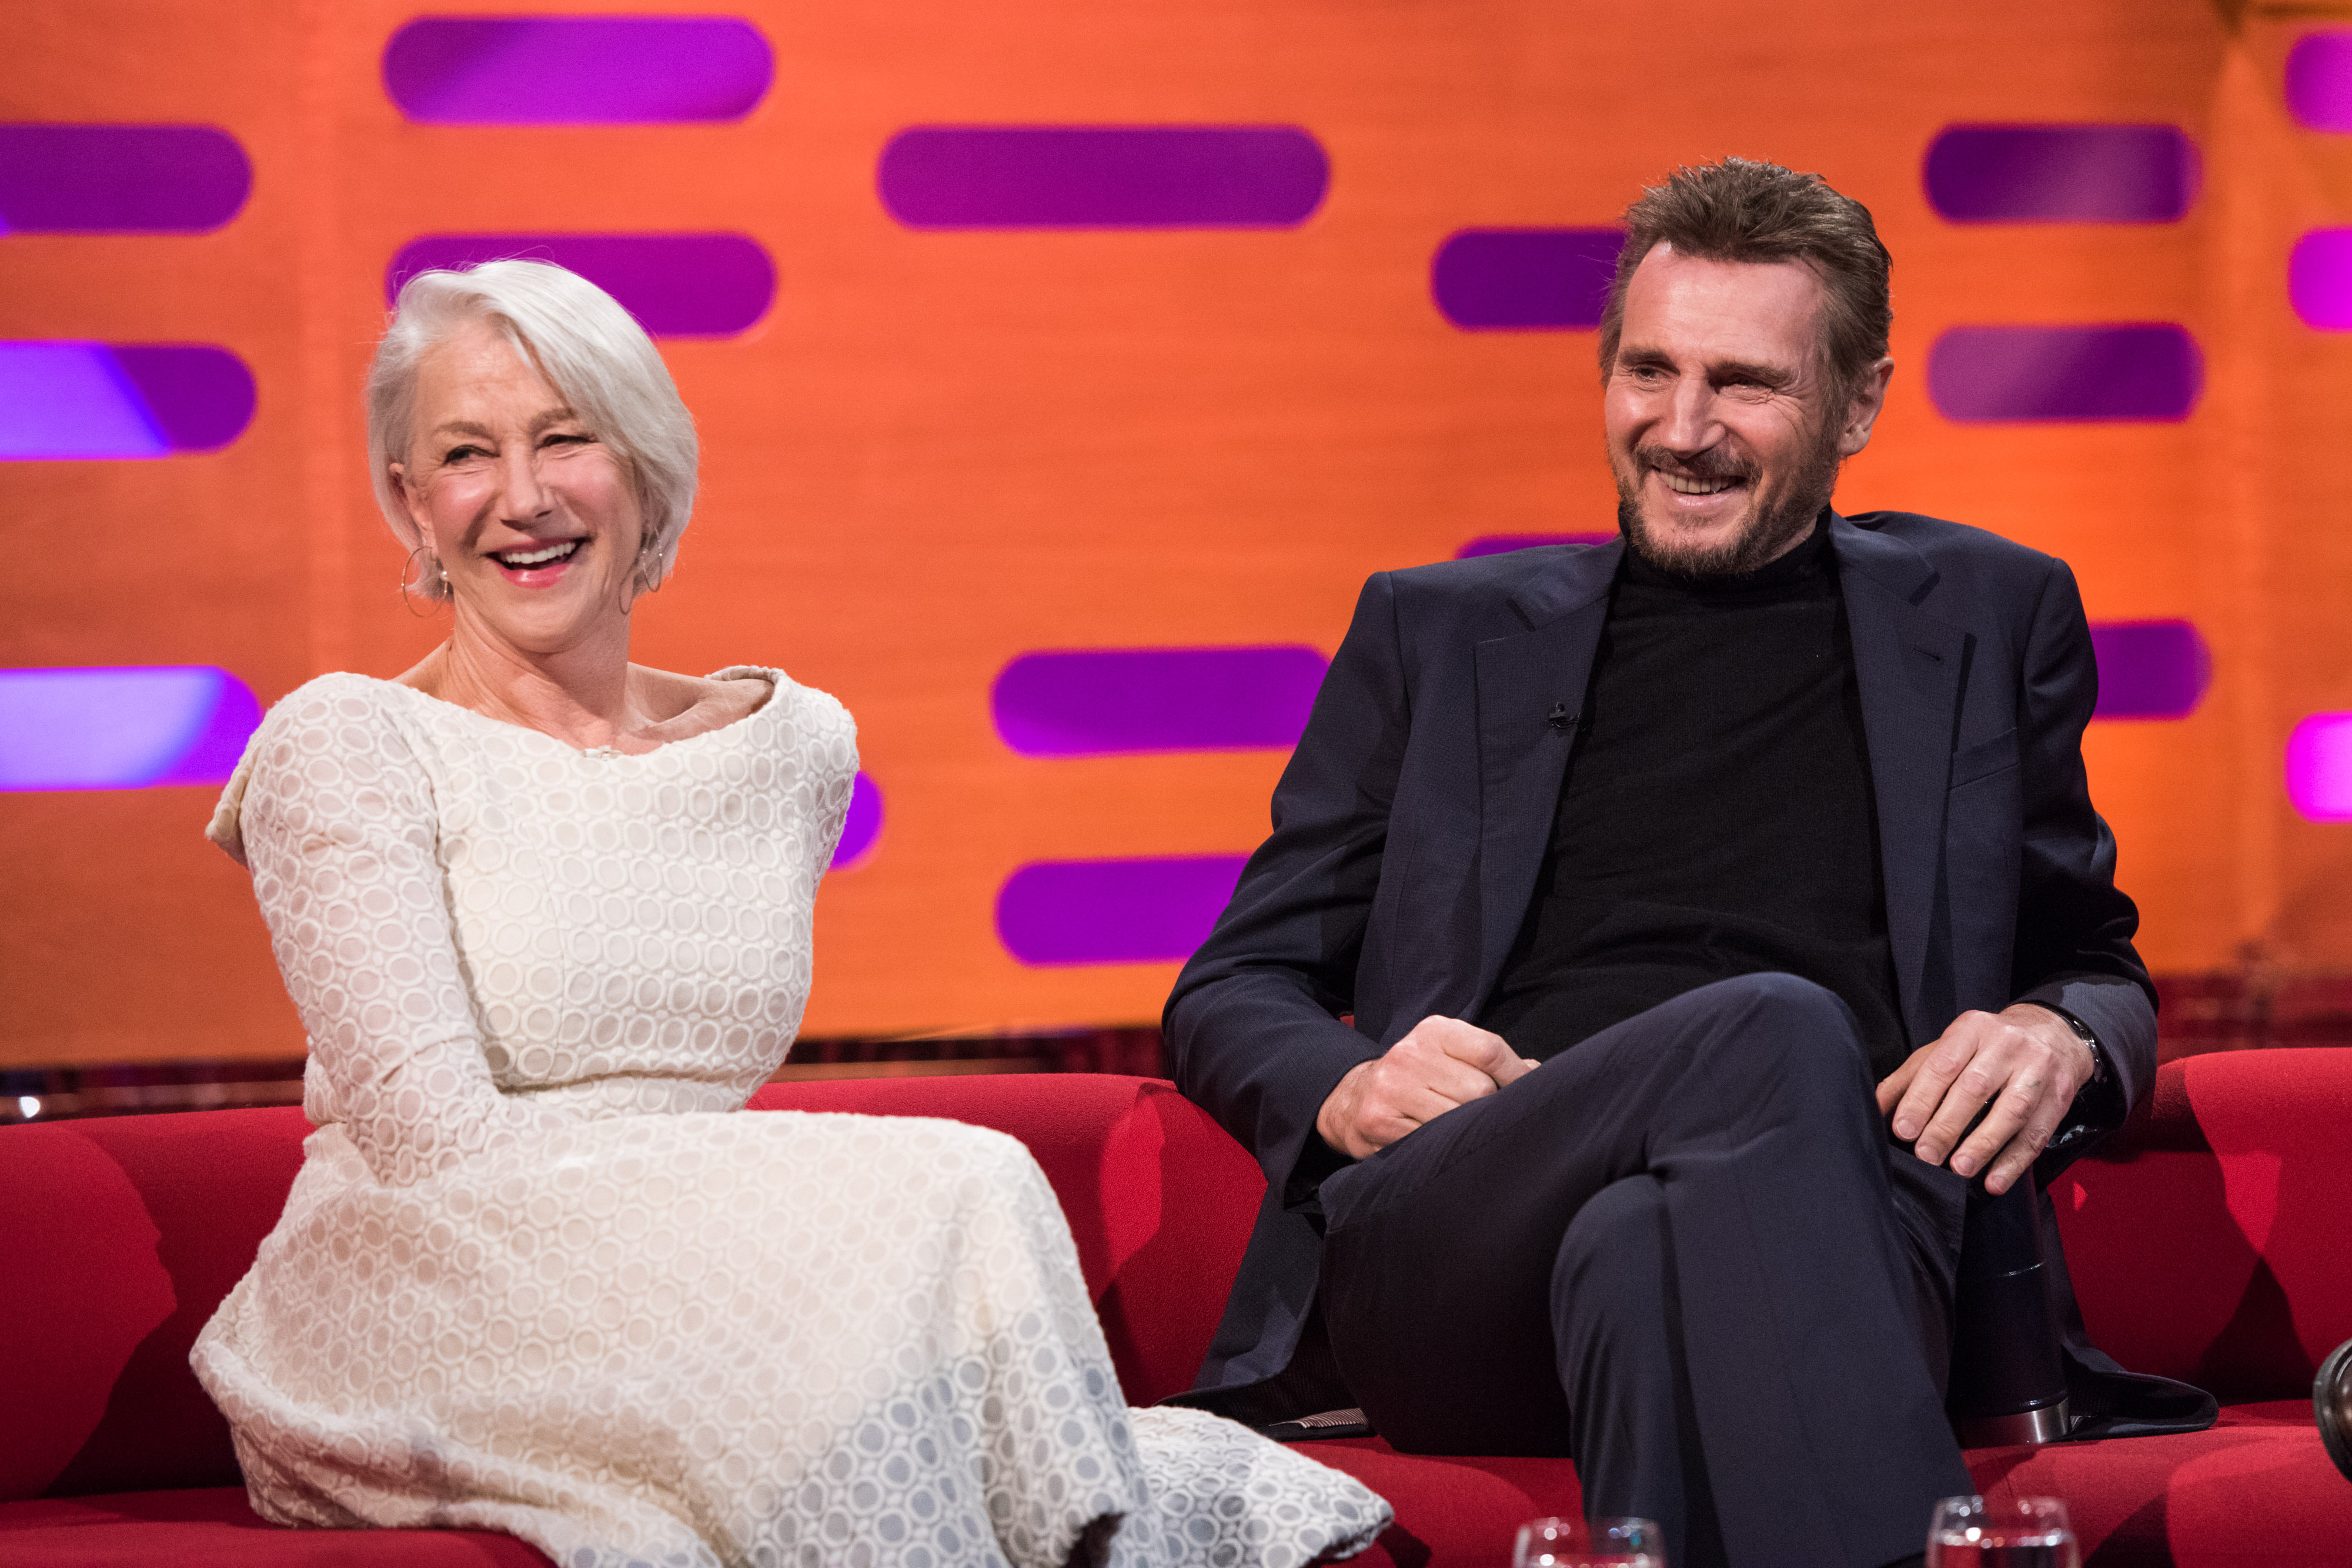 Helen Mirren and Liam Neeson on "The Graham Norton Show" at The London Studios on January 18, 2018 in London, England. | Source: Getty Images